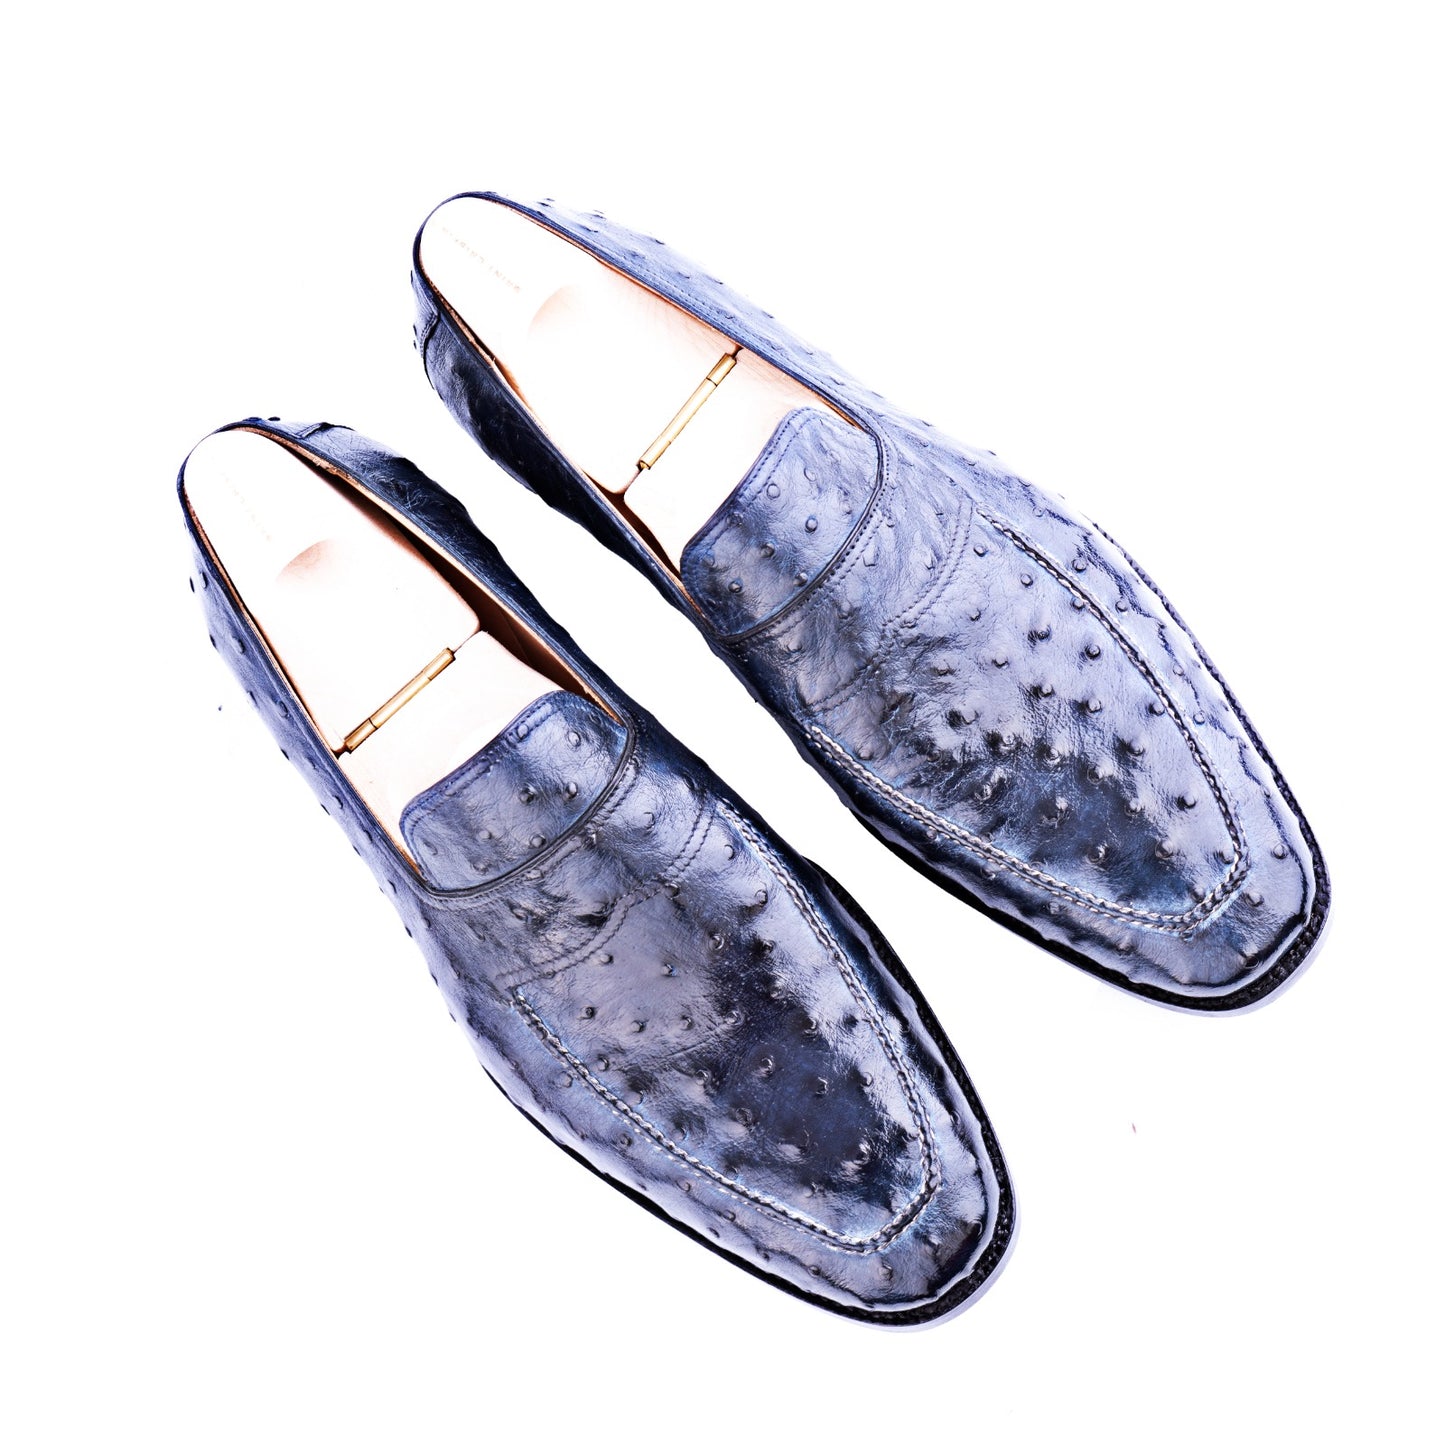 Norwegian Loafer in Royal blue ostrich leather